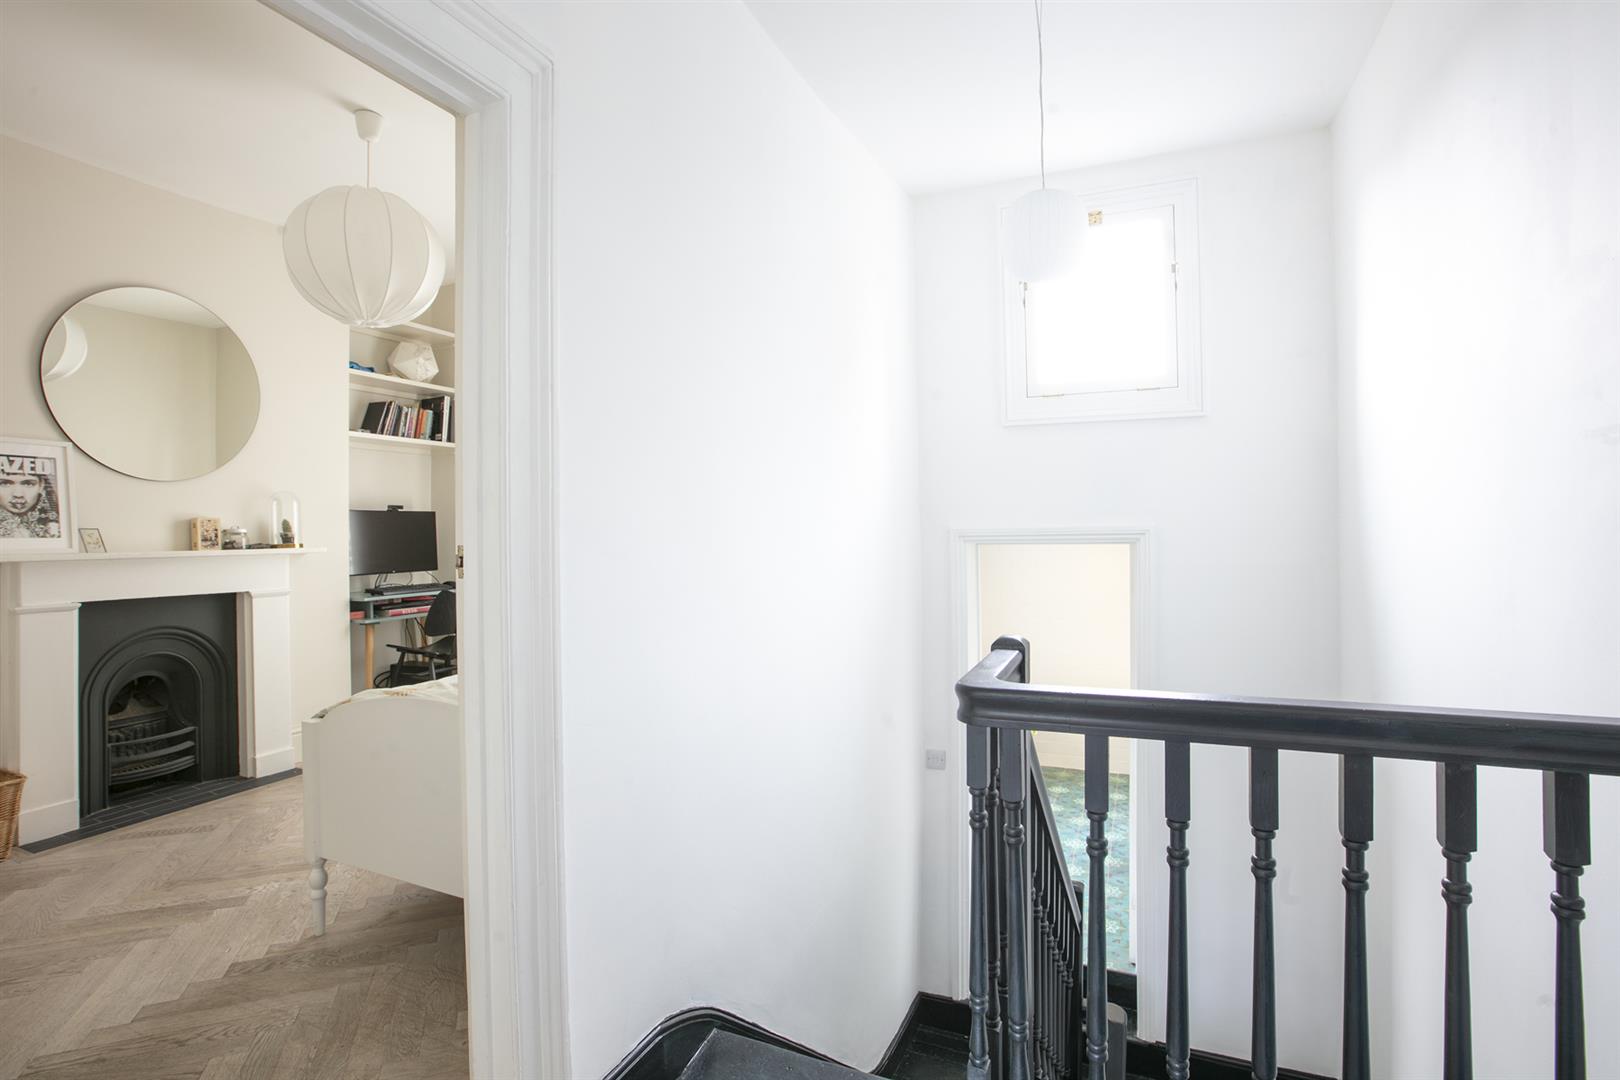 Flat - Conversion For Sale in Talfourd Place, Peckham, SE15 873 view12